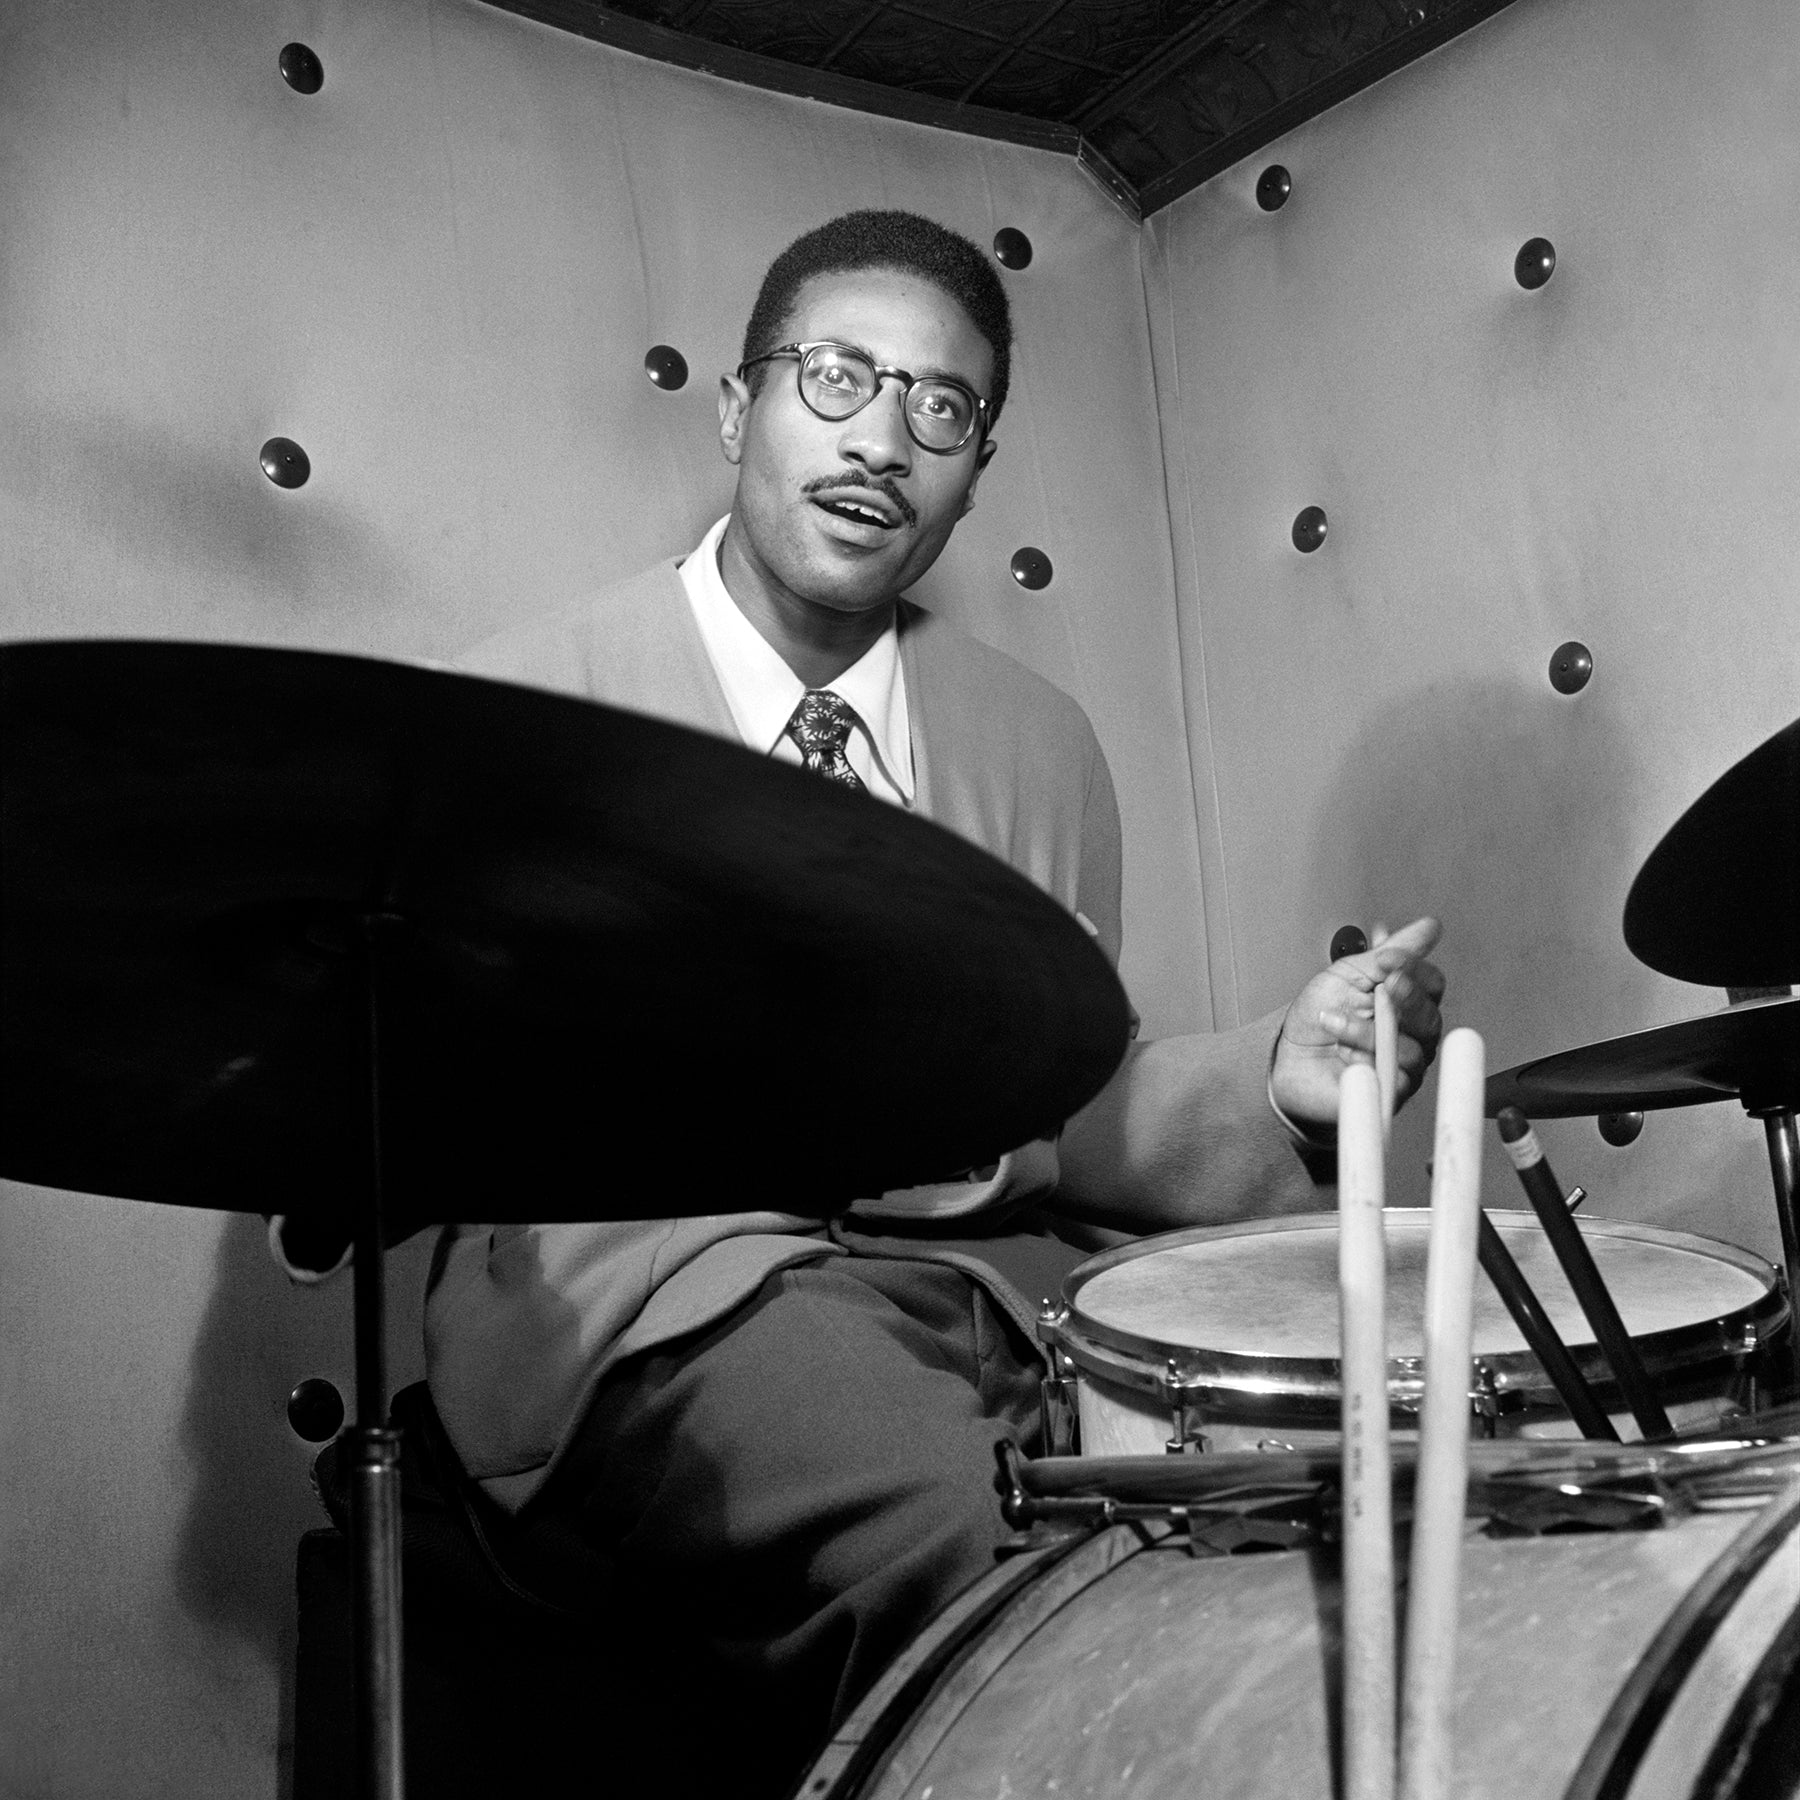 A vintage, square format photograph of Max Roach playing drums